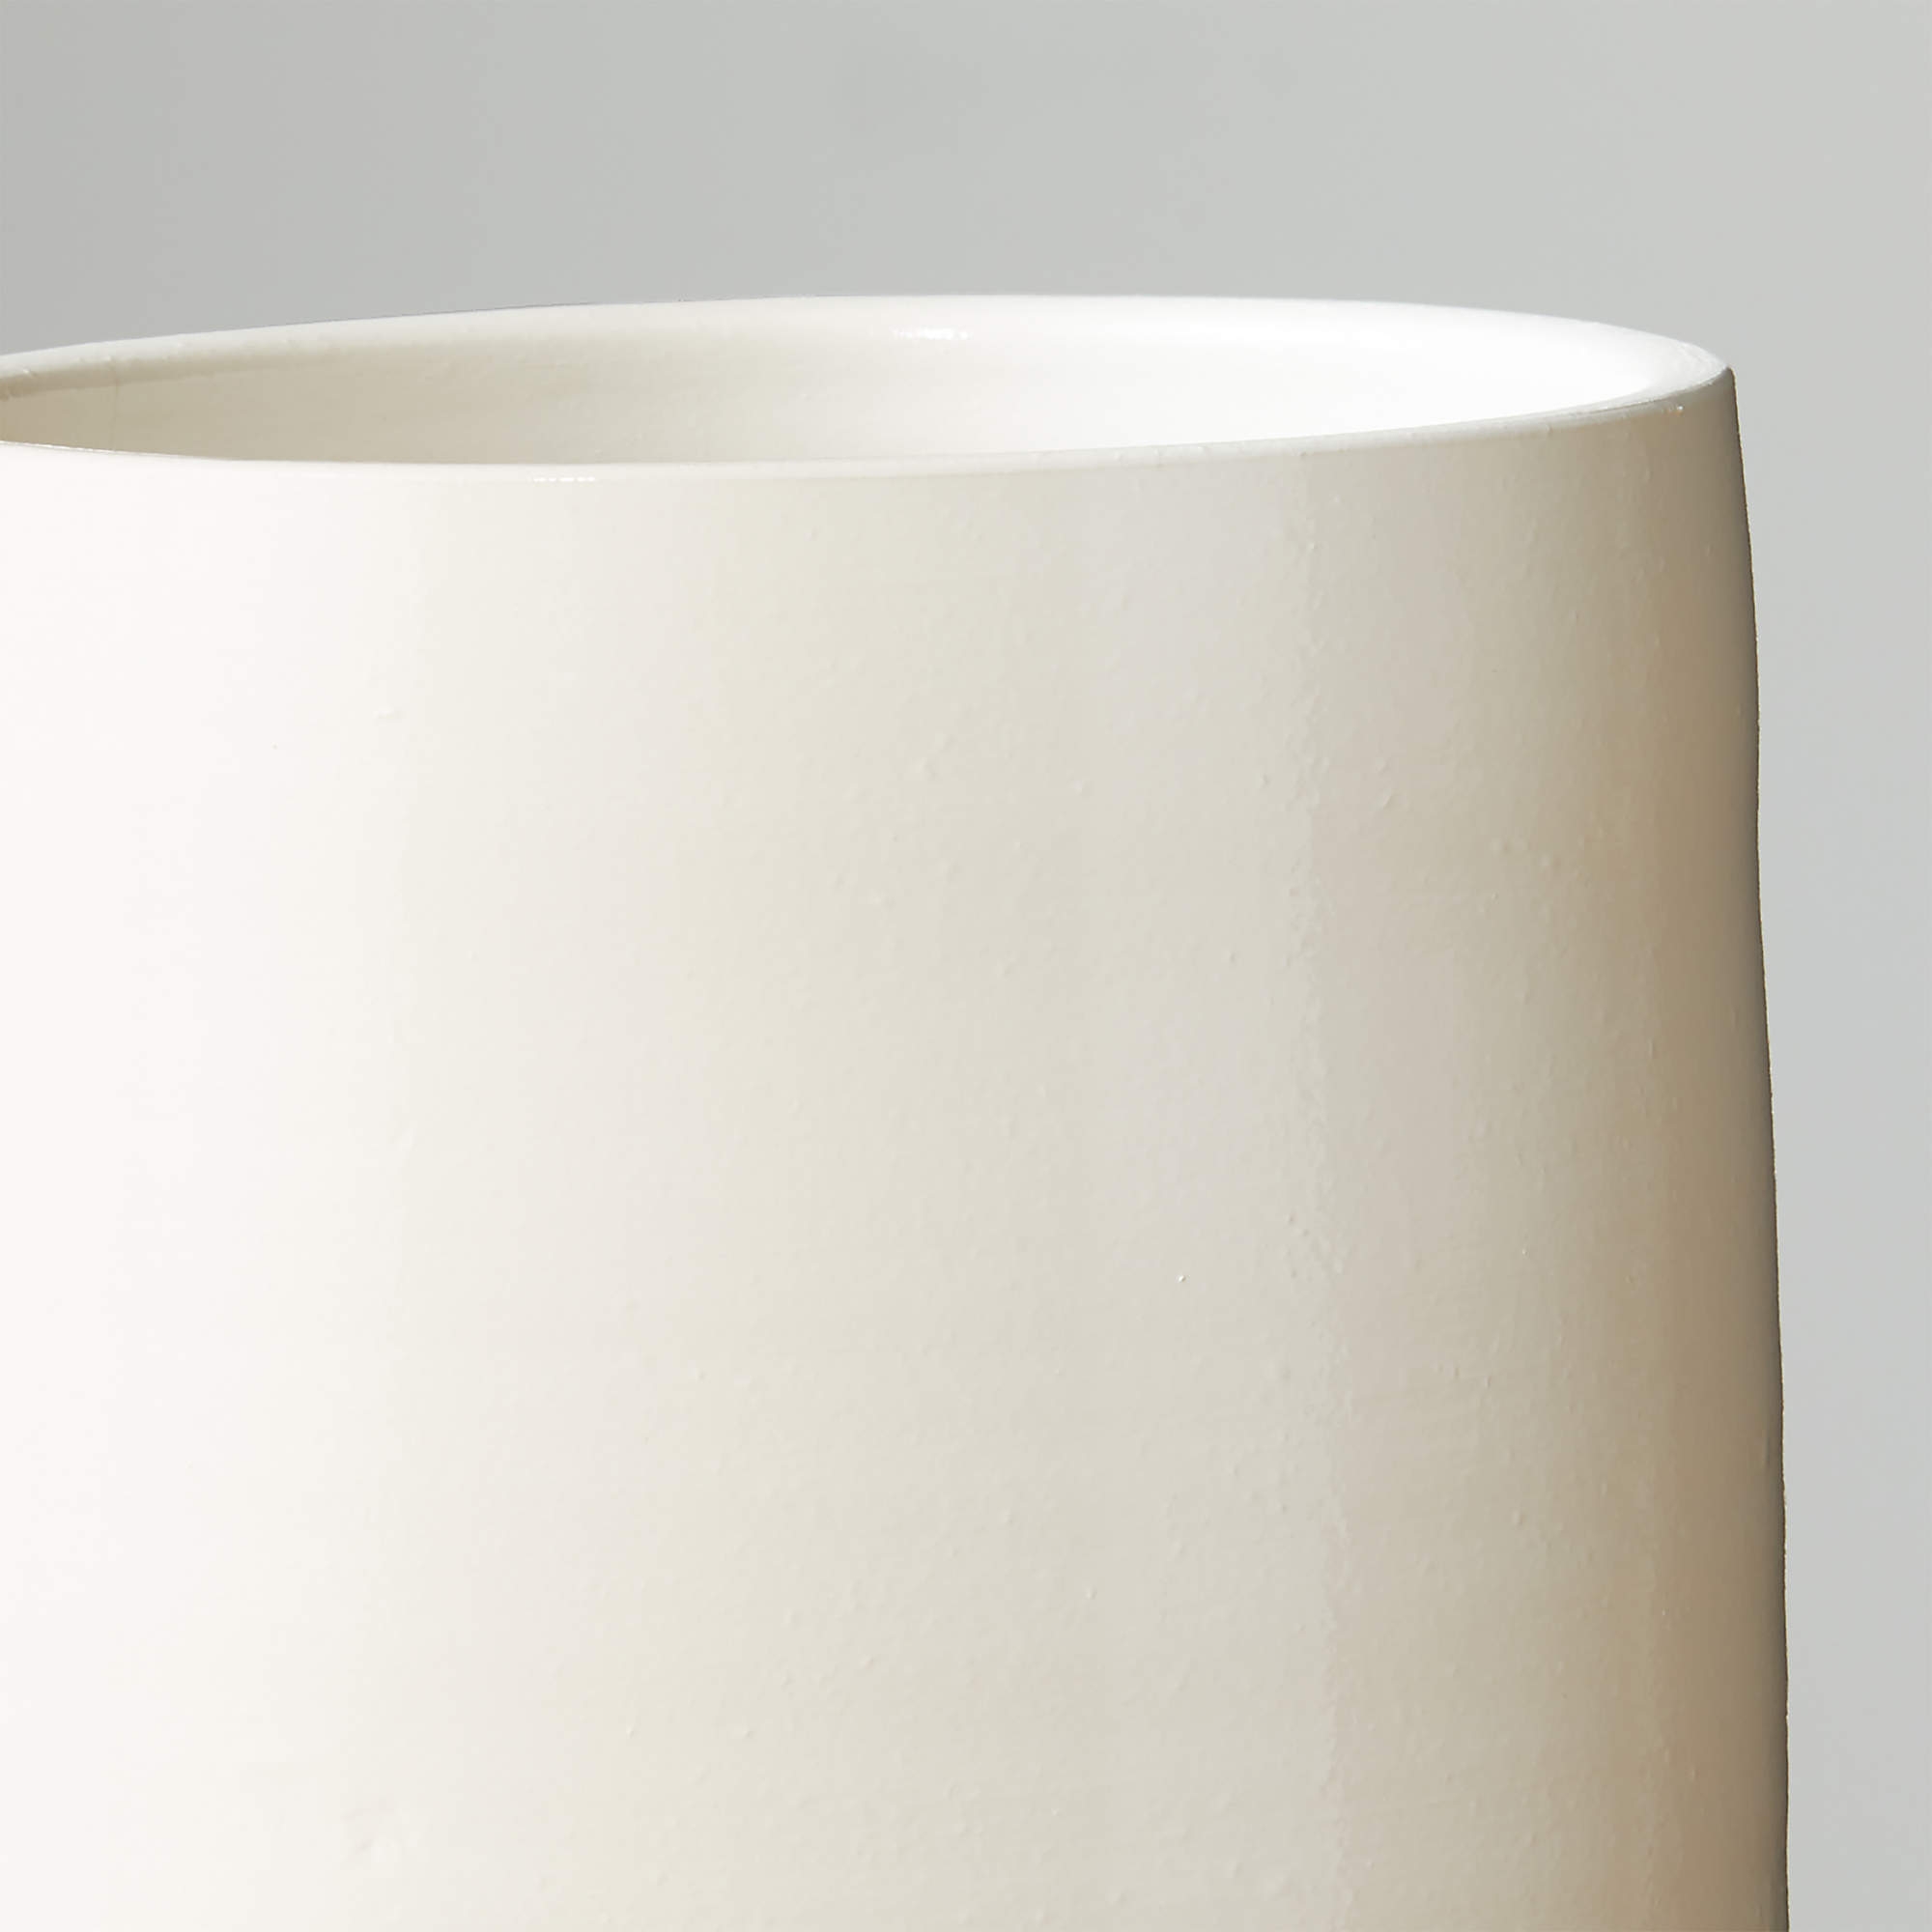 Rie Hand-Thrown Vase, White, Large - Image 2